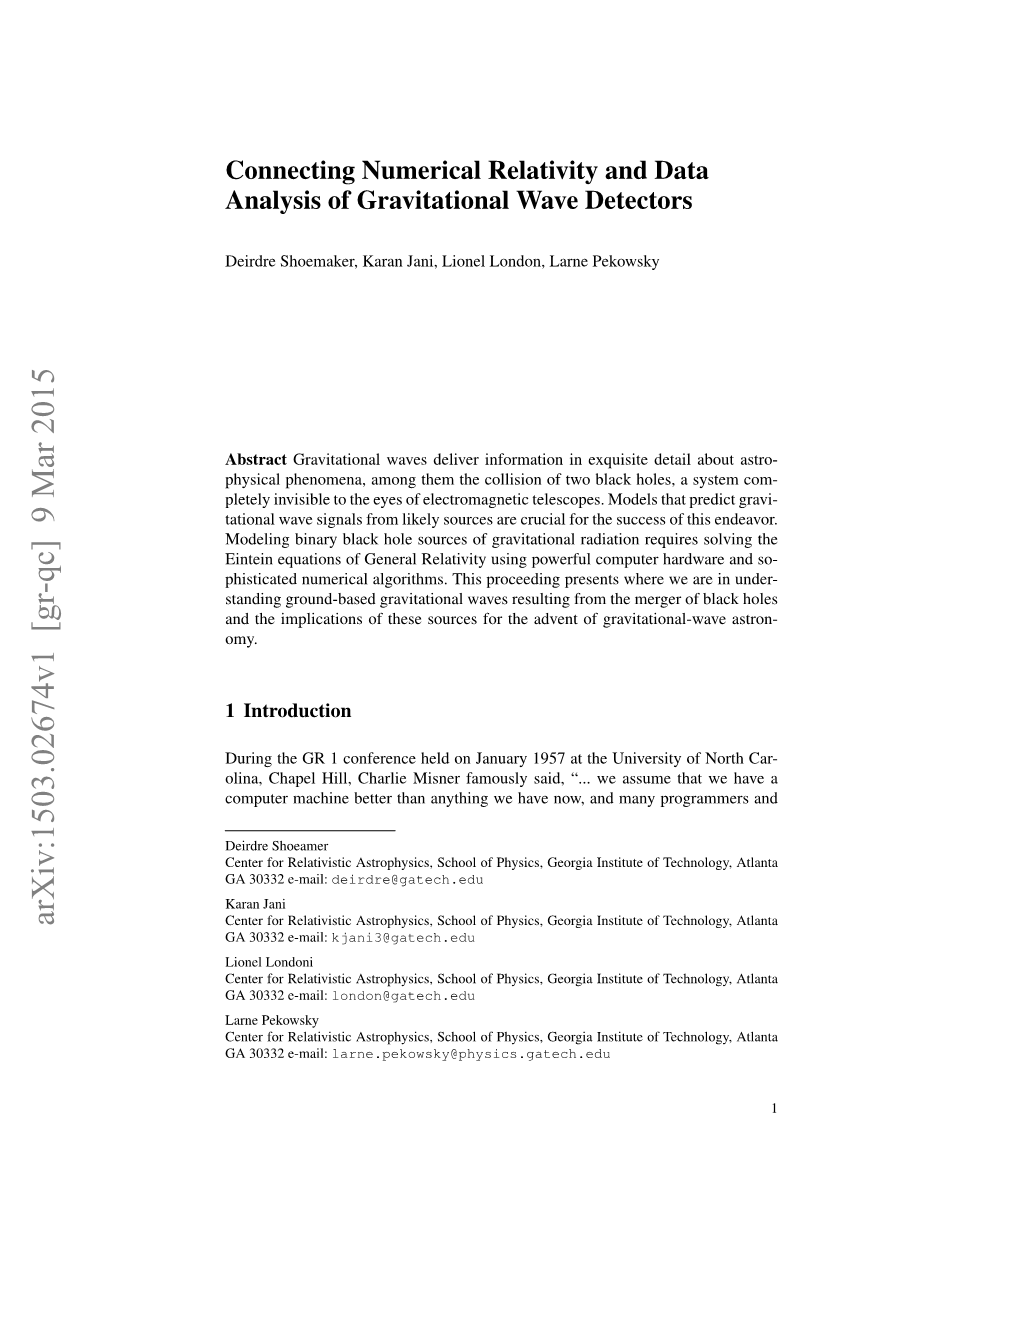 Connecting Numerical Relativity and Data Analysis of Gravitational Wave Detectors